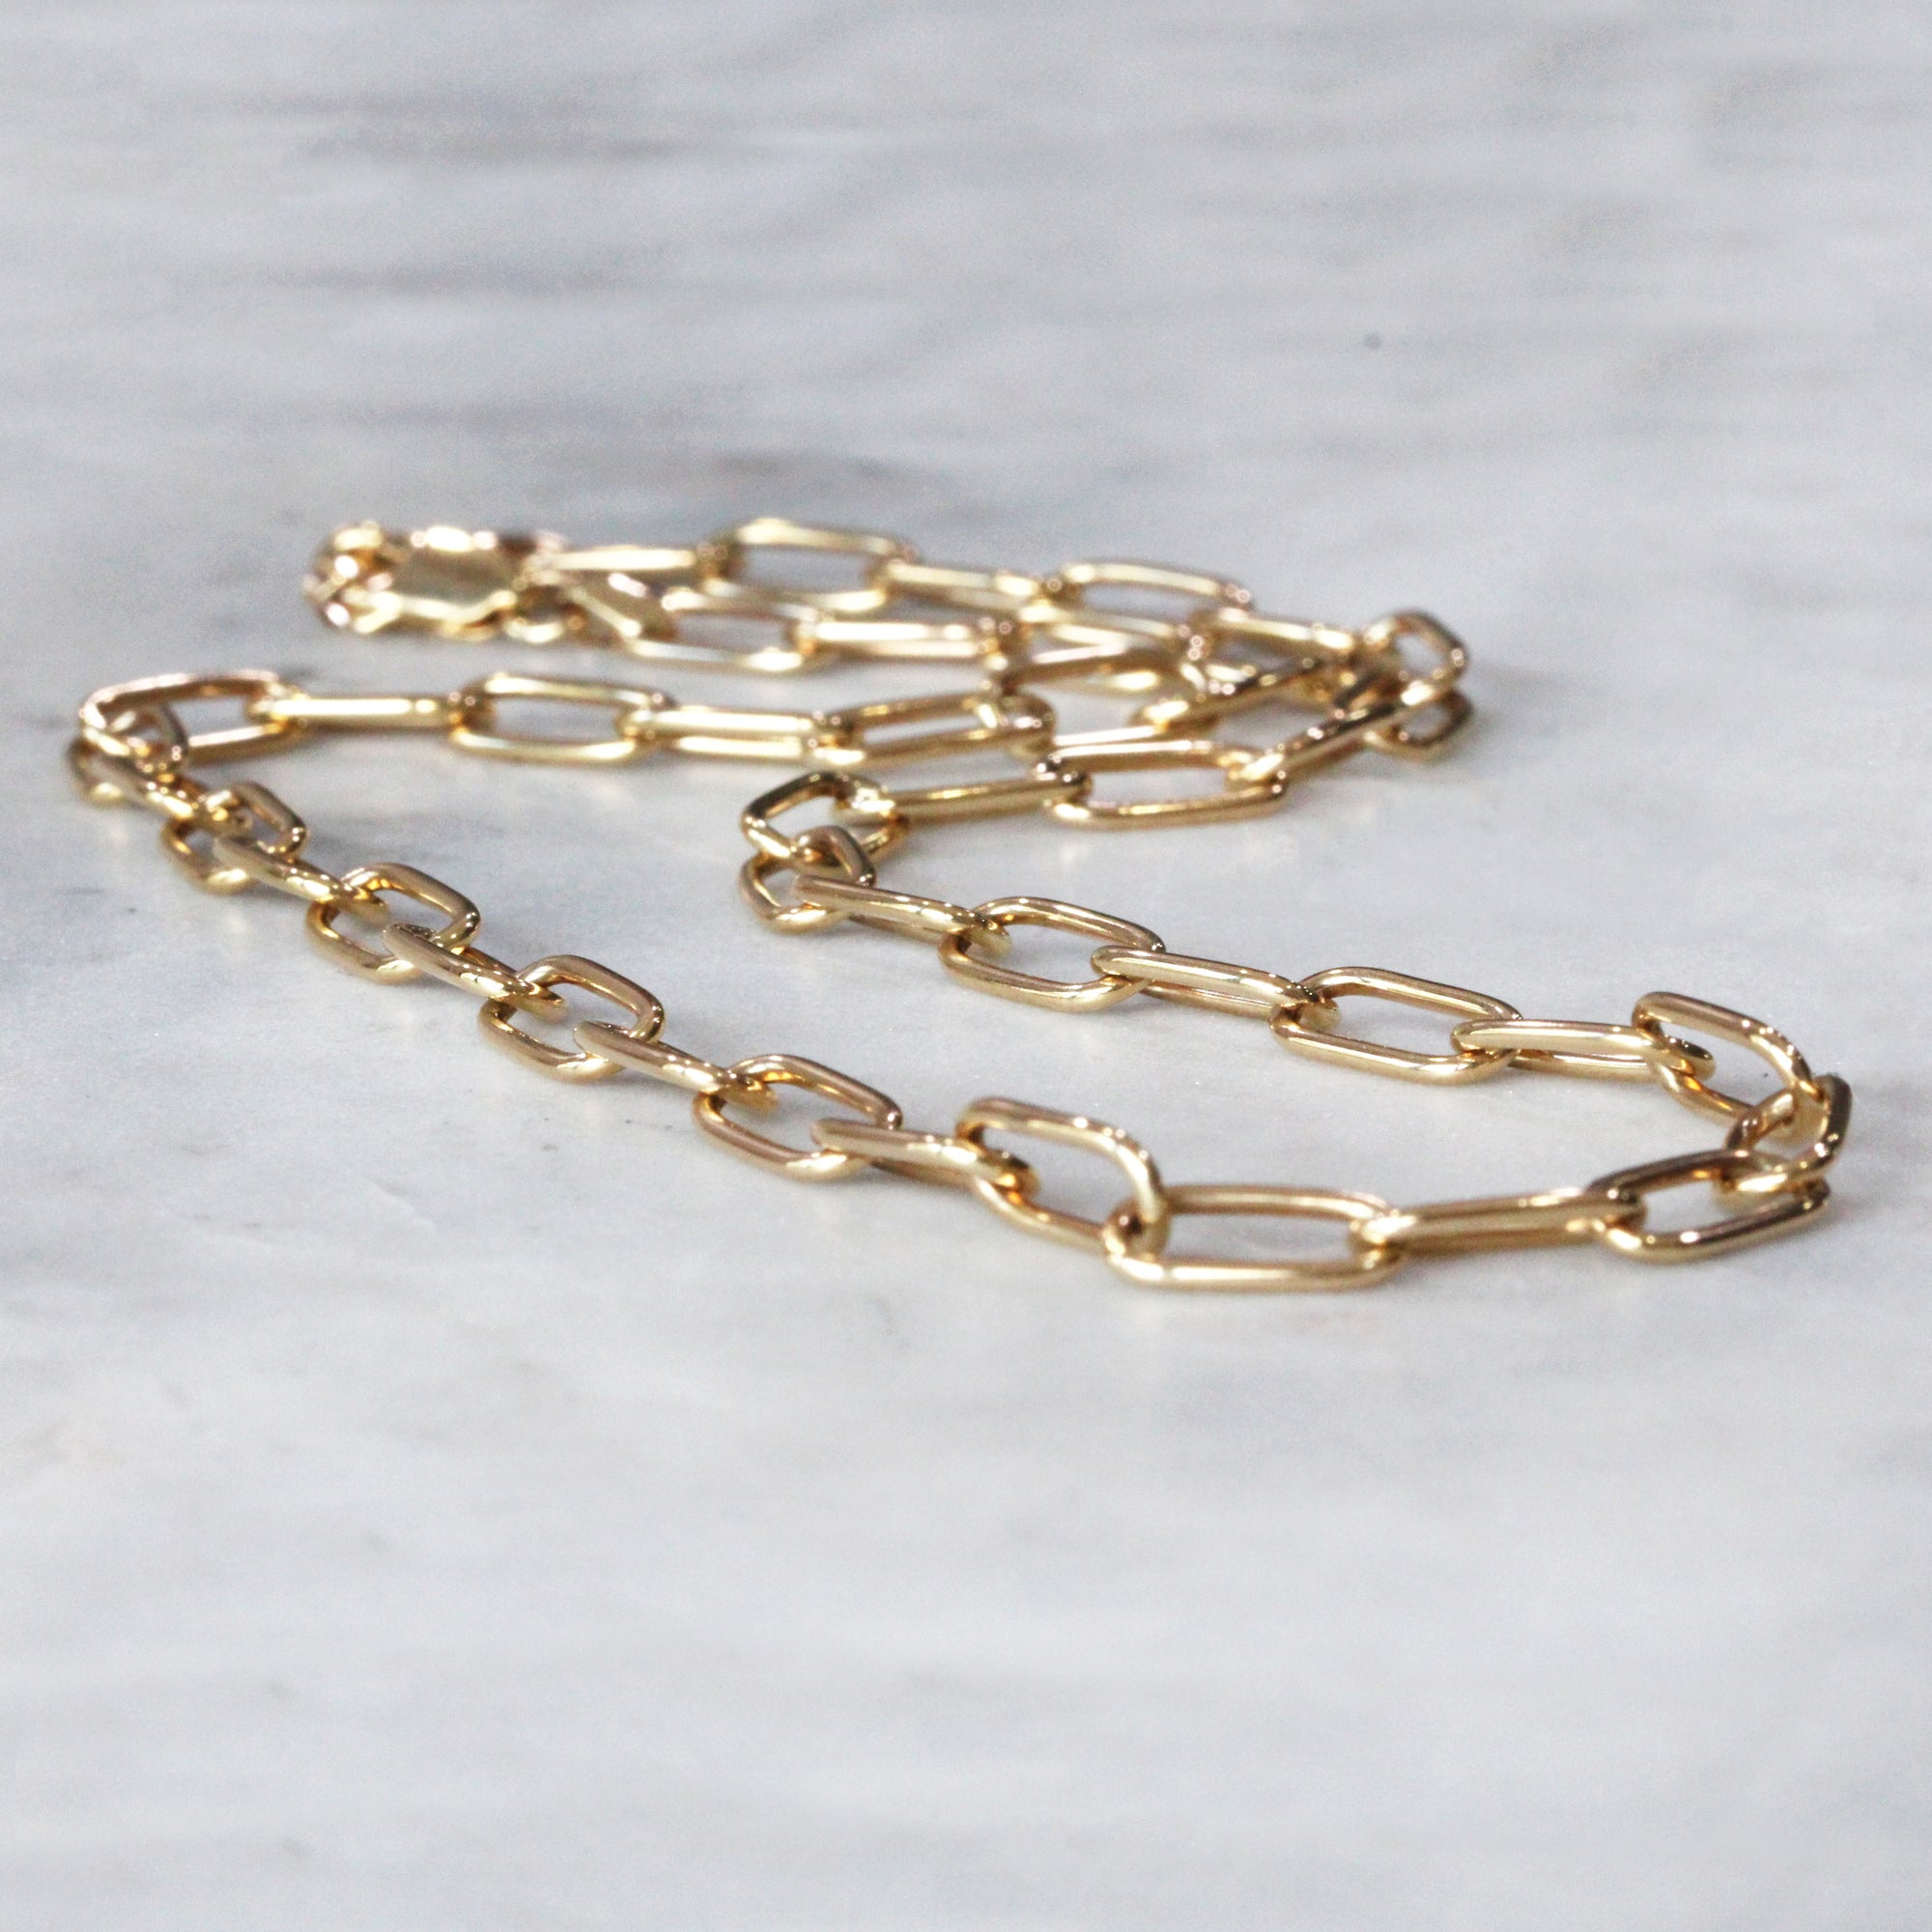 Graduated Paper Clip Link Necklace in 10K Gold - 16